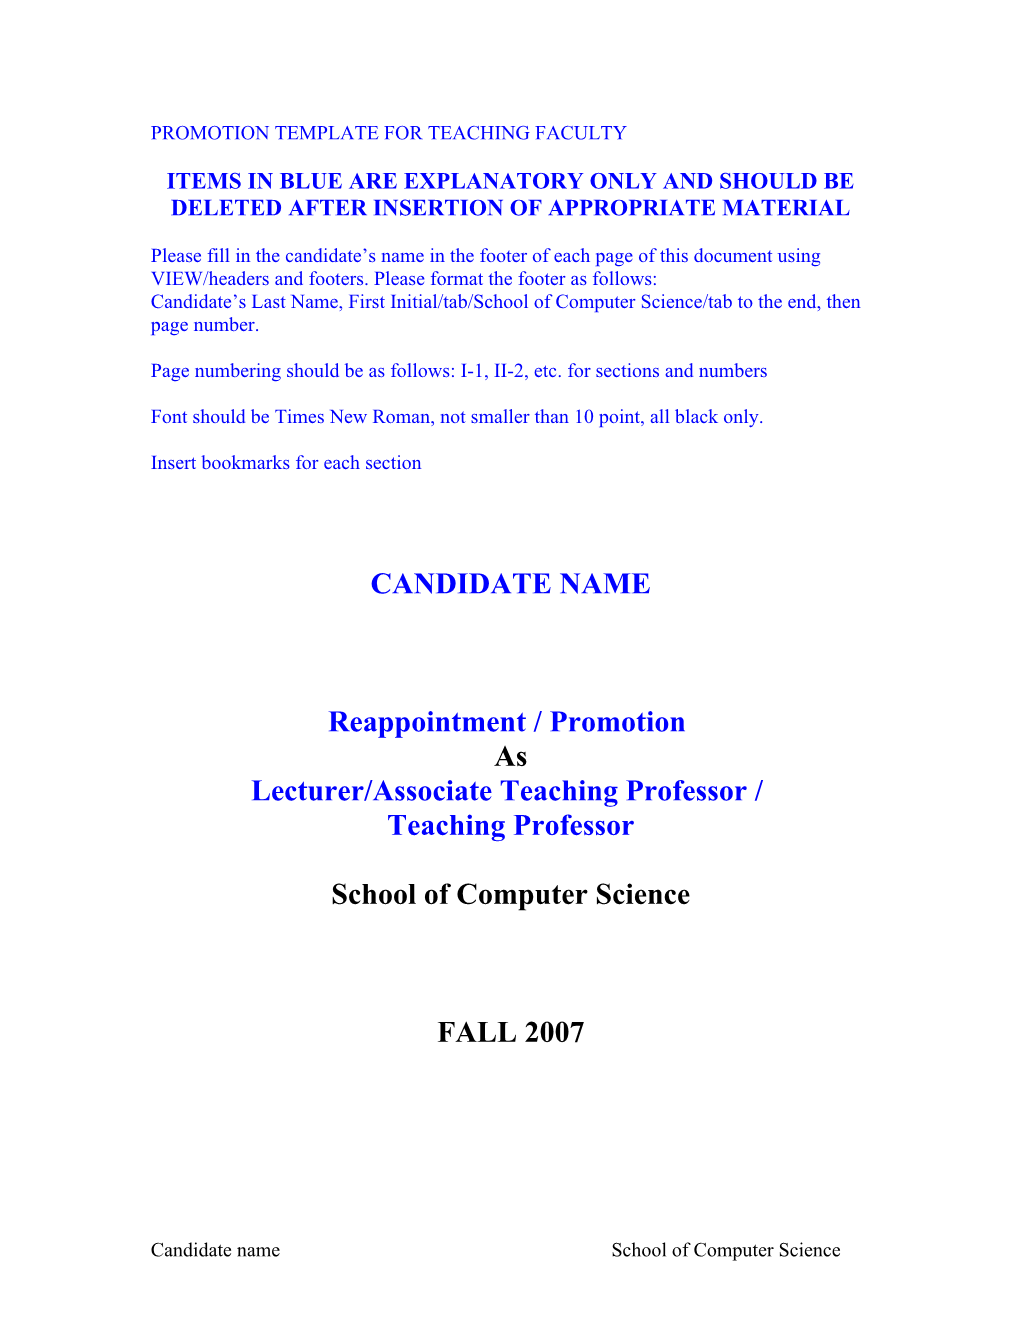 Promotion Template for Teaching Faculty